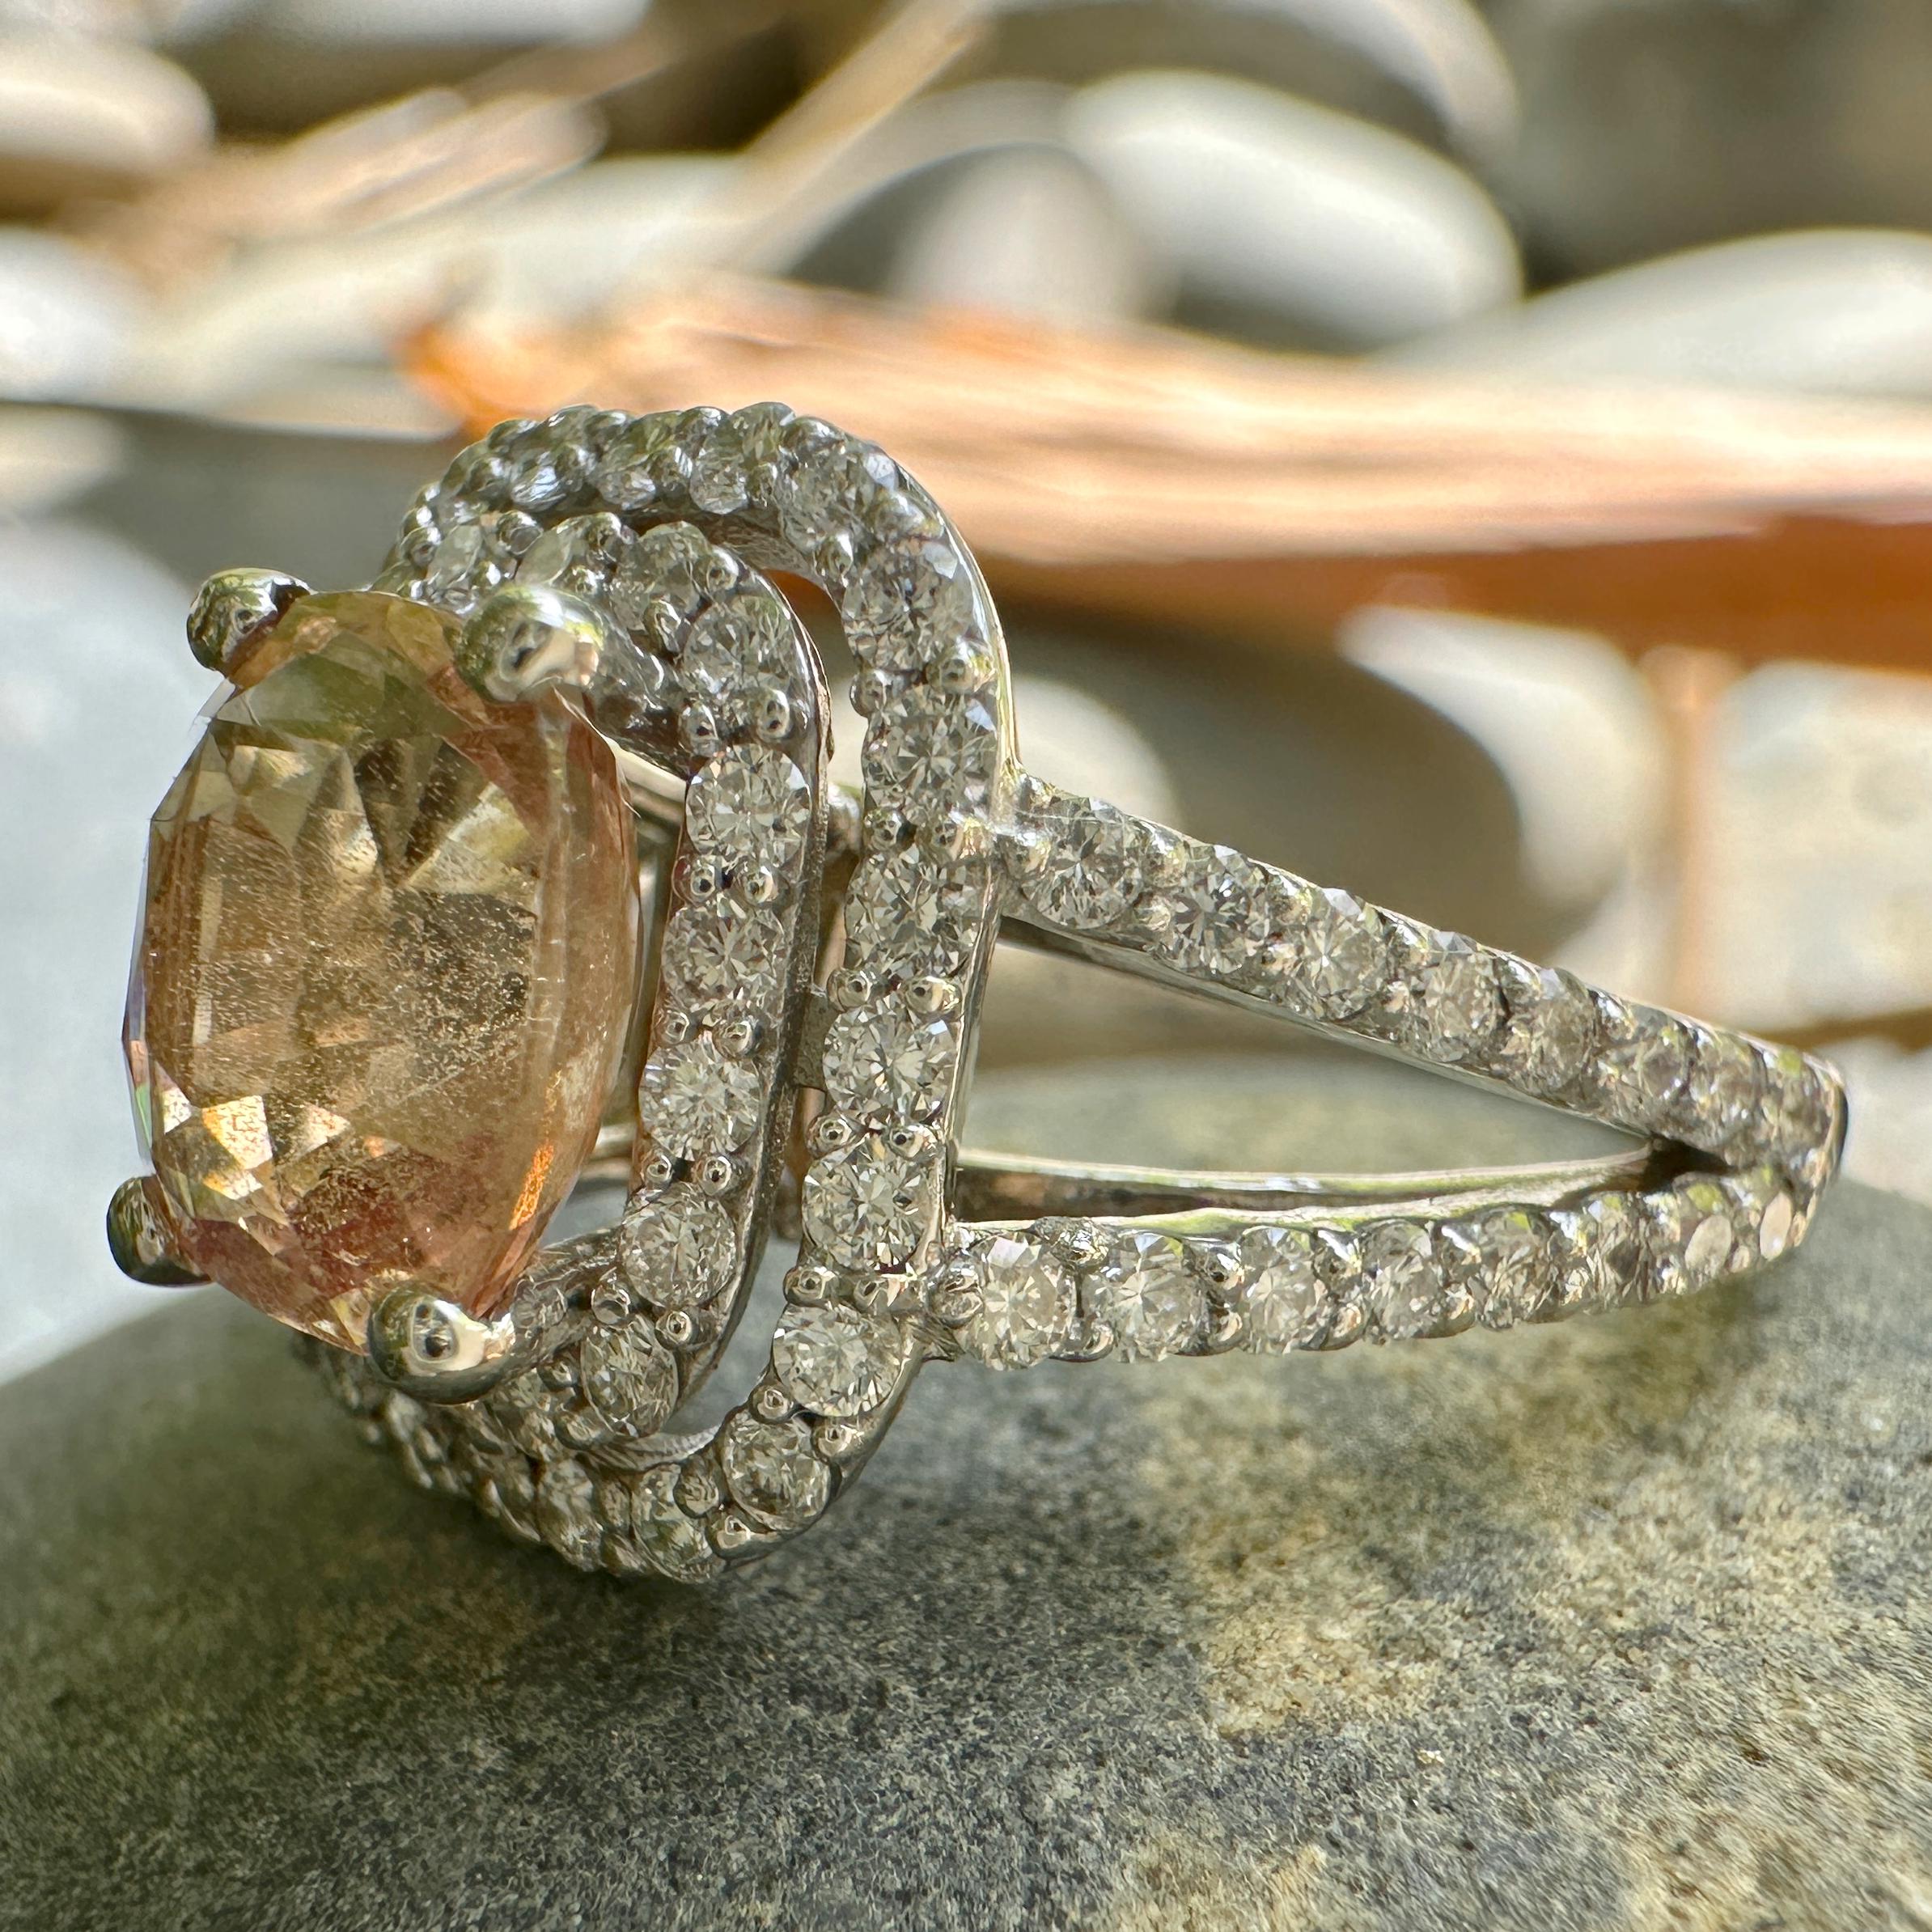 GIA-Certified Unheated 2.25ct Peach Sapphire in White Gold Diamond Halo Ring In Excellent Condition For Sale In Sherman Oaks, CA